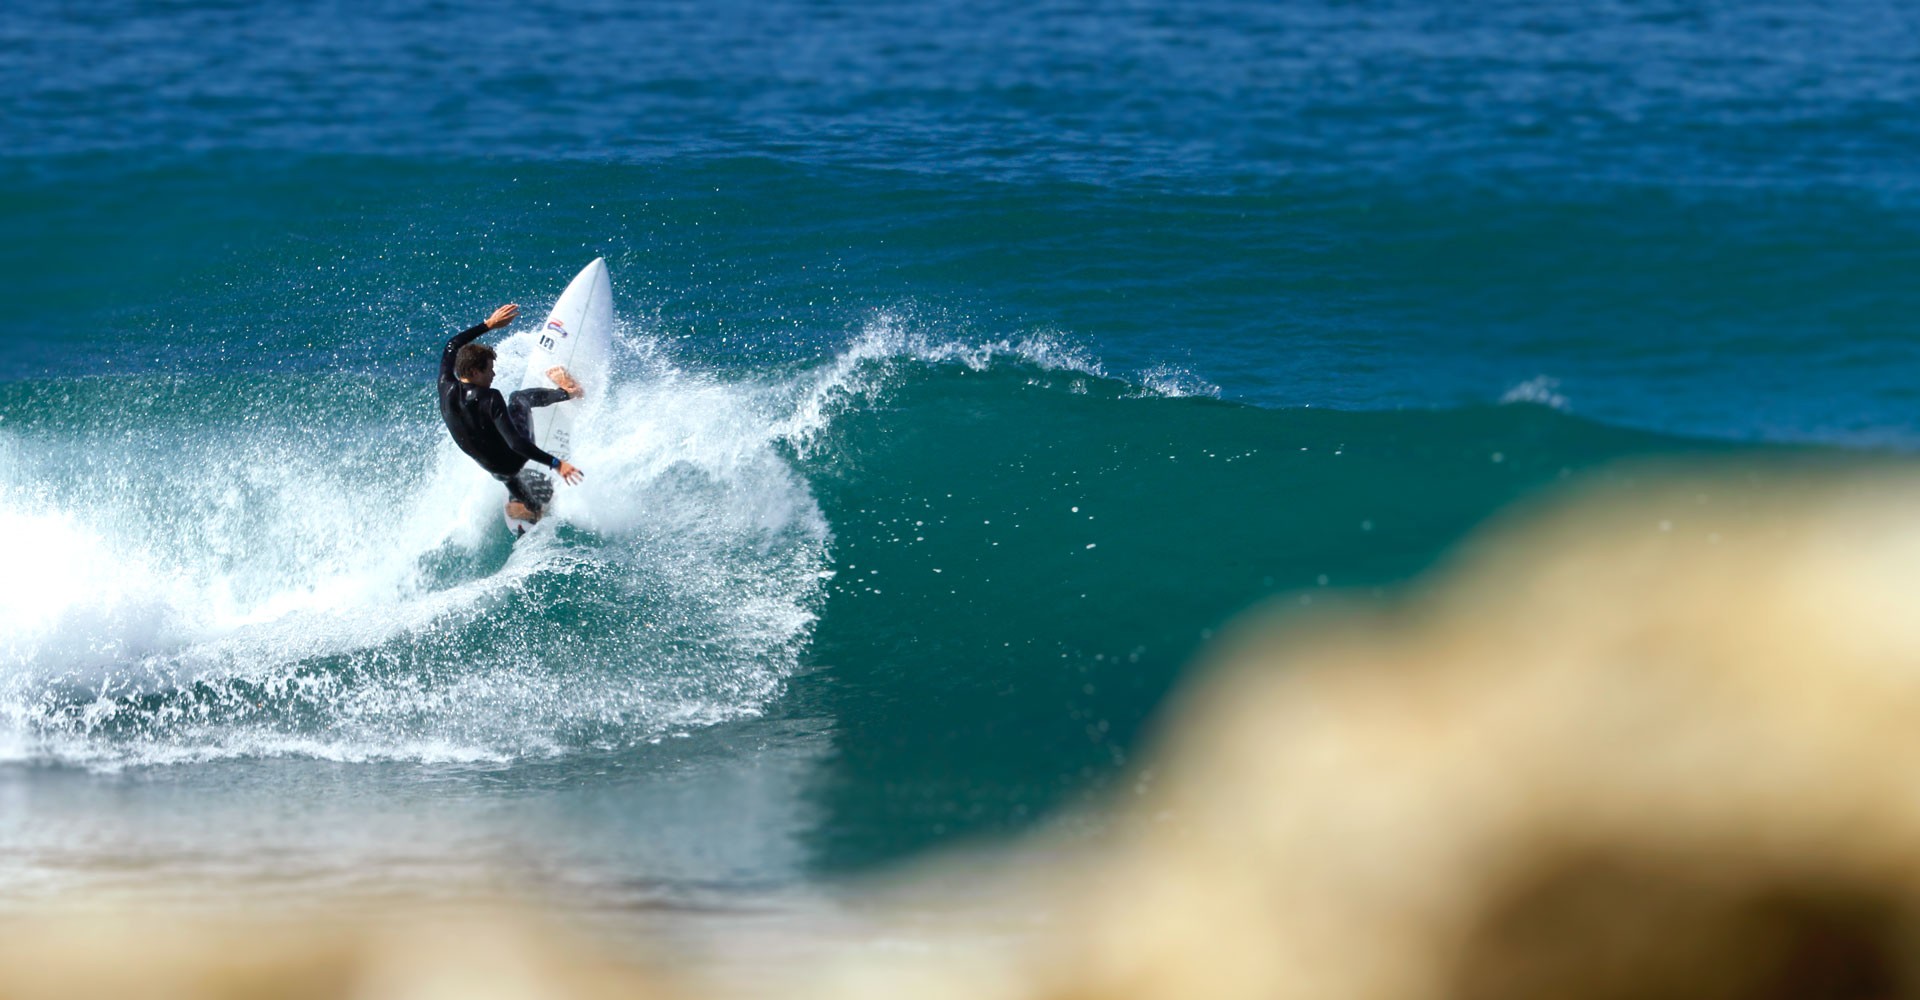 Free surfer Filipe Jervis is surfing for Mica Surfboards Team in Portugal.